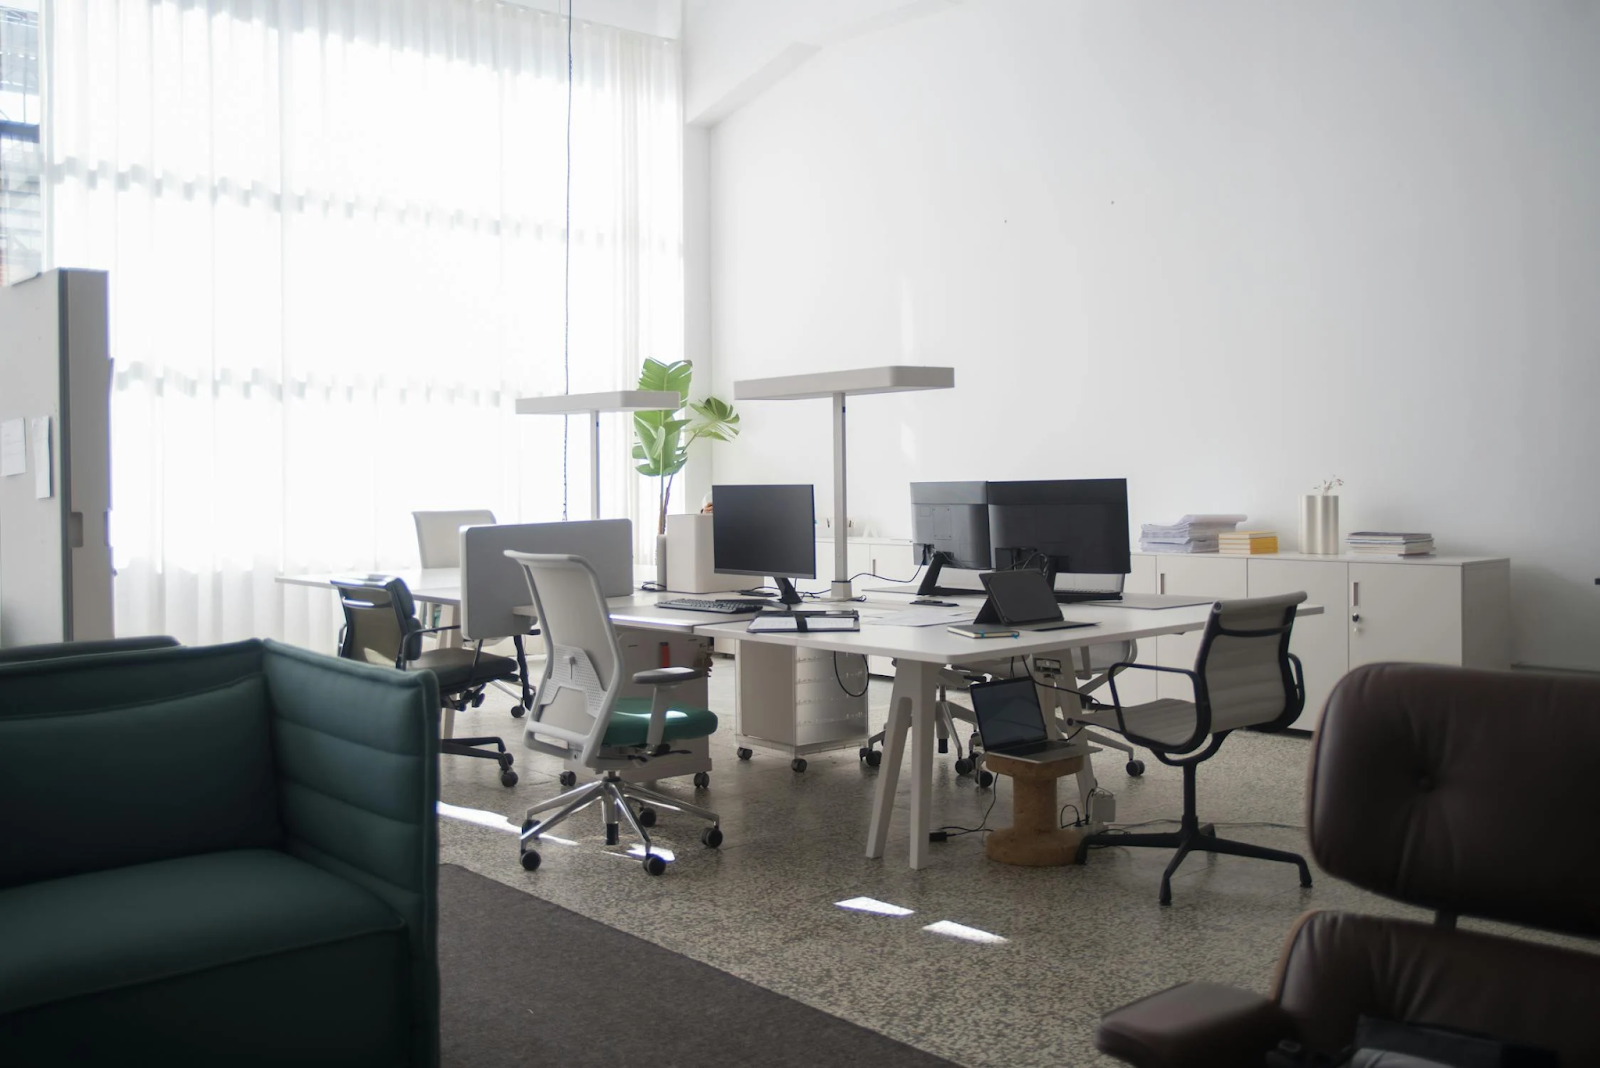 Photo by Kampus Production from Pexels: https://www.pexels.com/photo/interior-of-an-office-8353767/